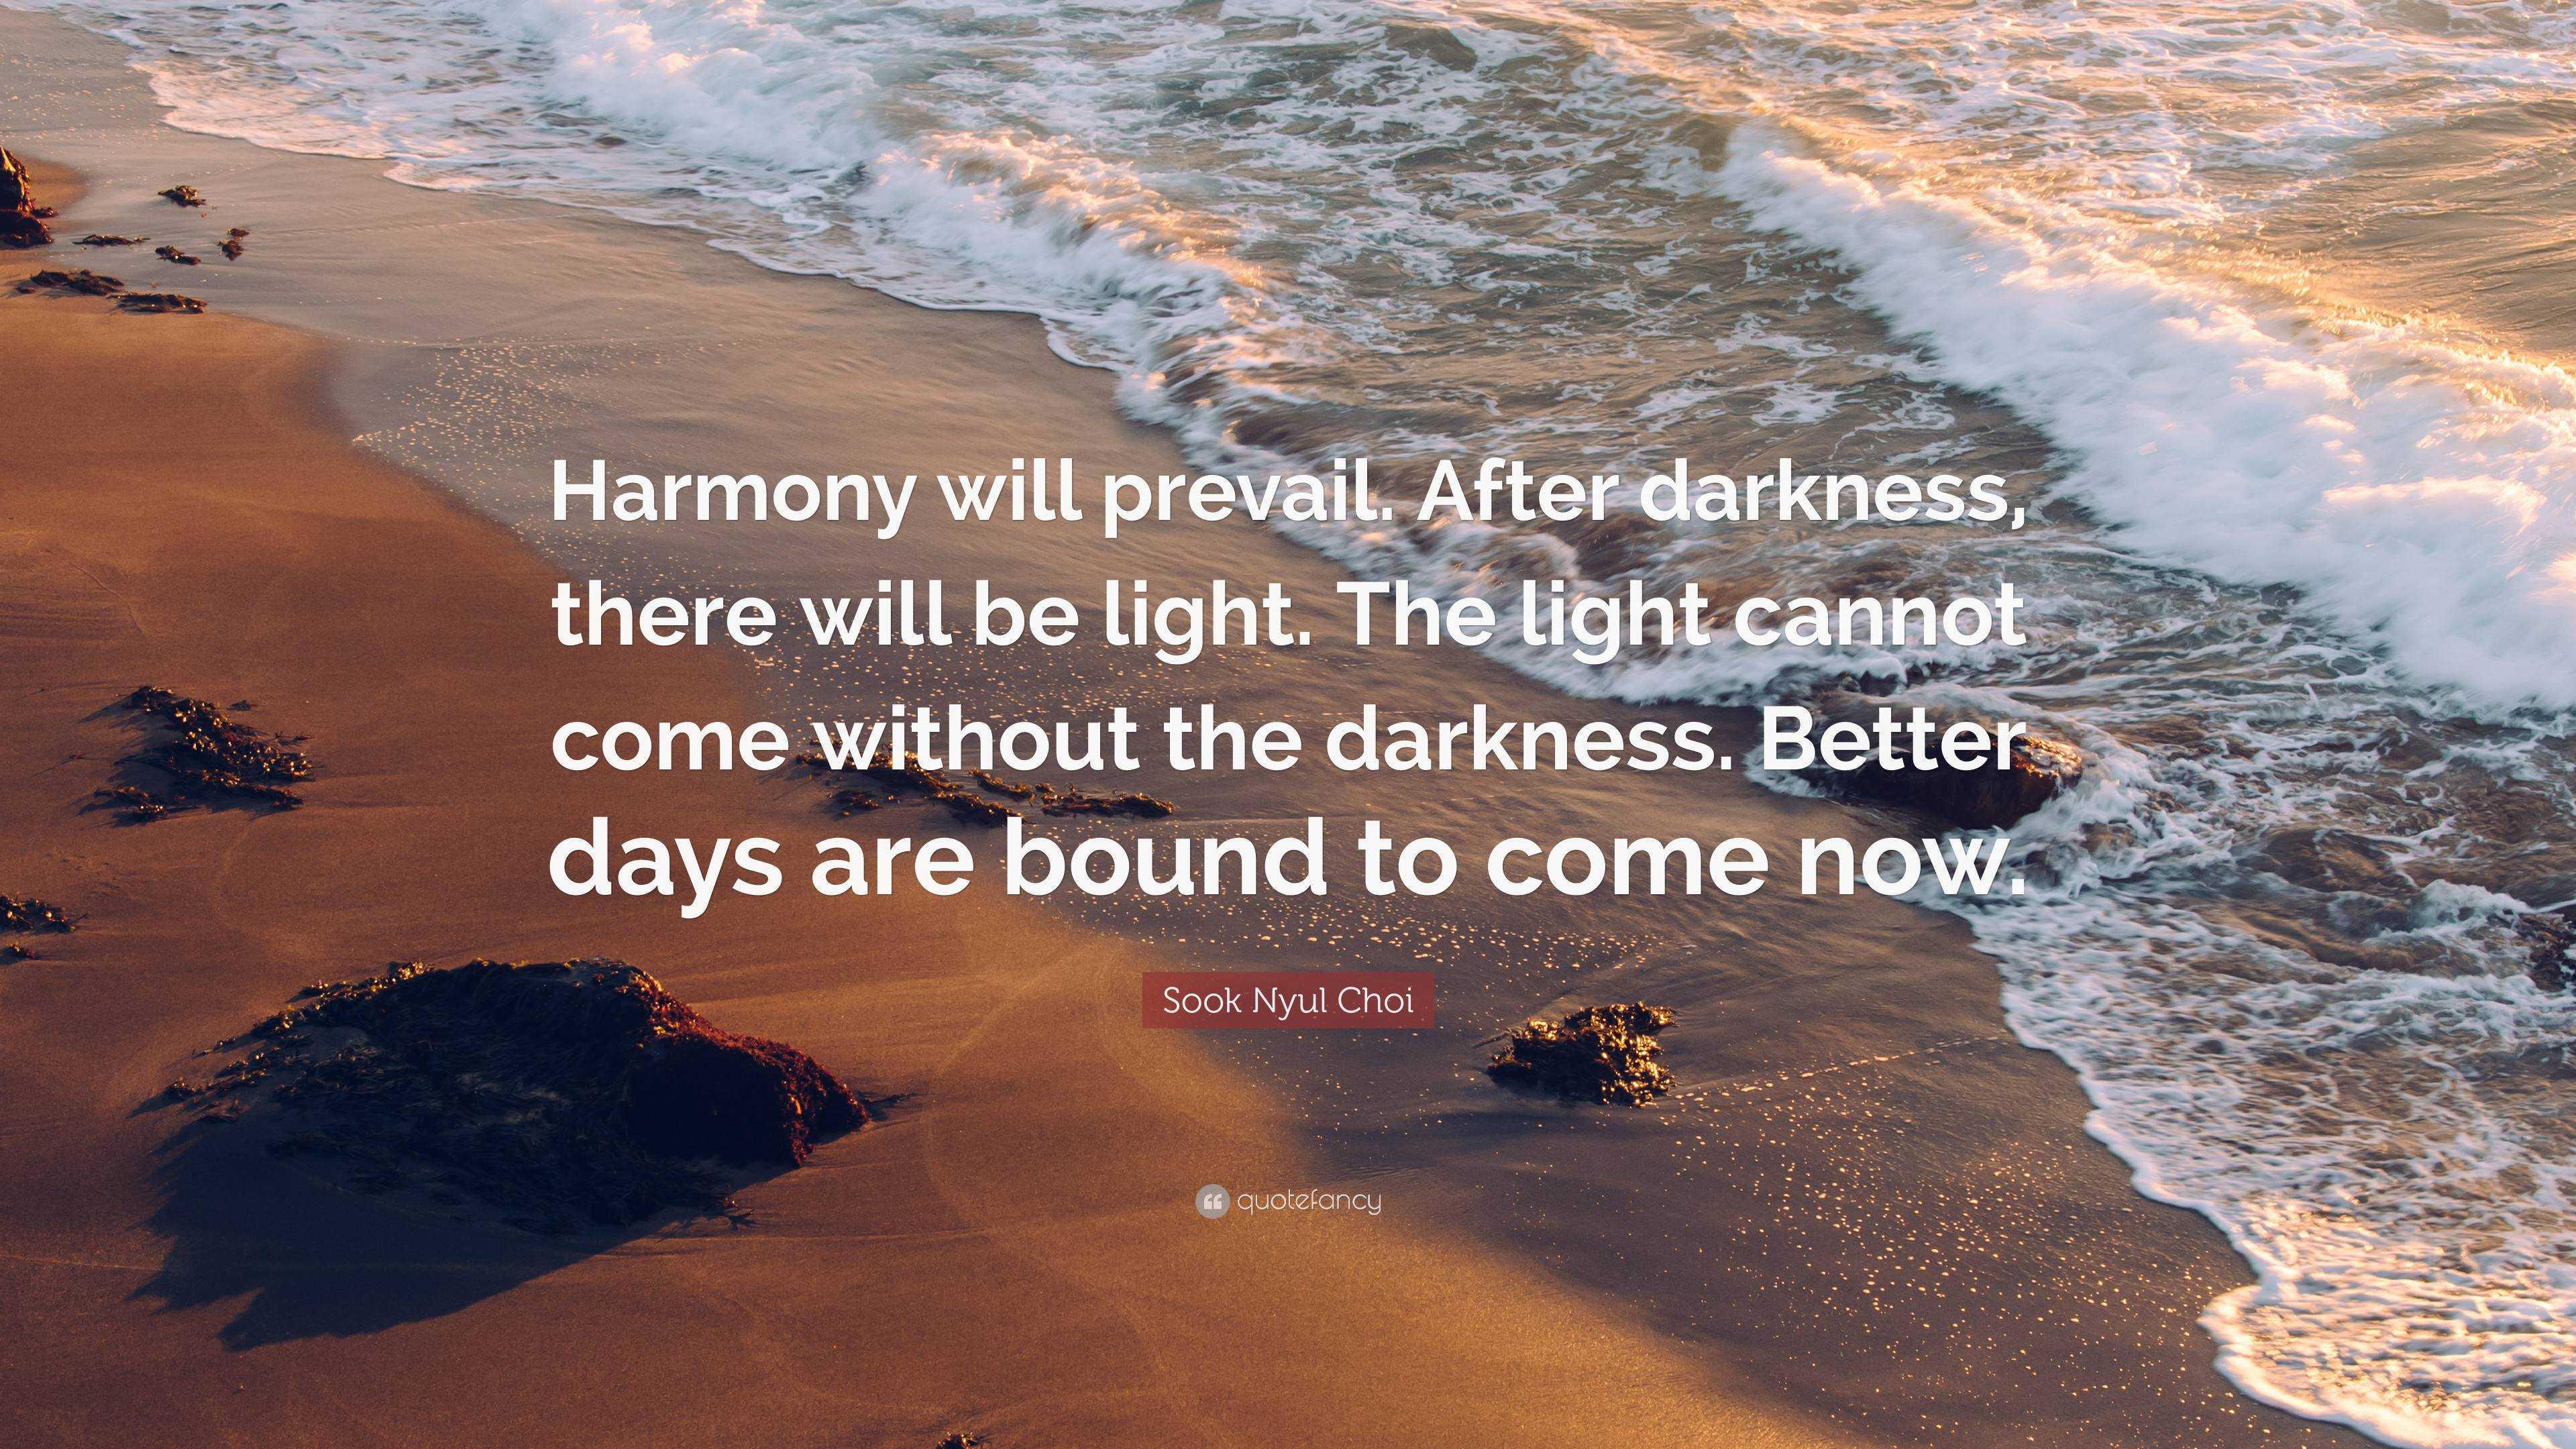 Sook Nyul Choi Quote: “Harmony will prevail. darkness, there will light. light cannot come without the darkness. Better days are b...”